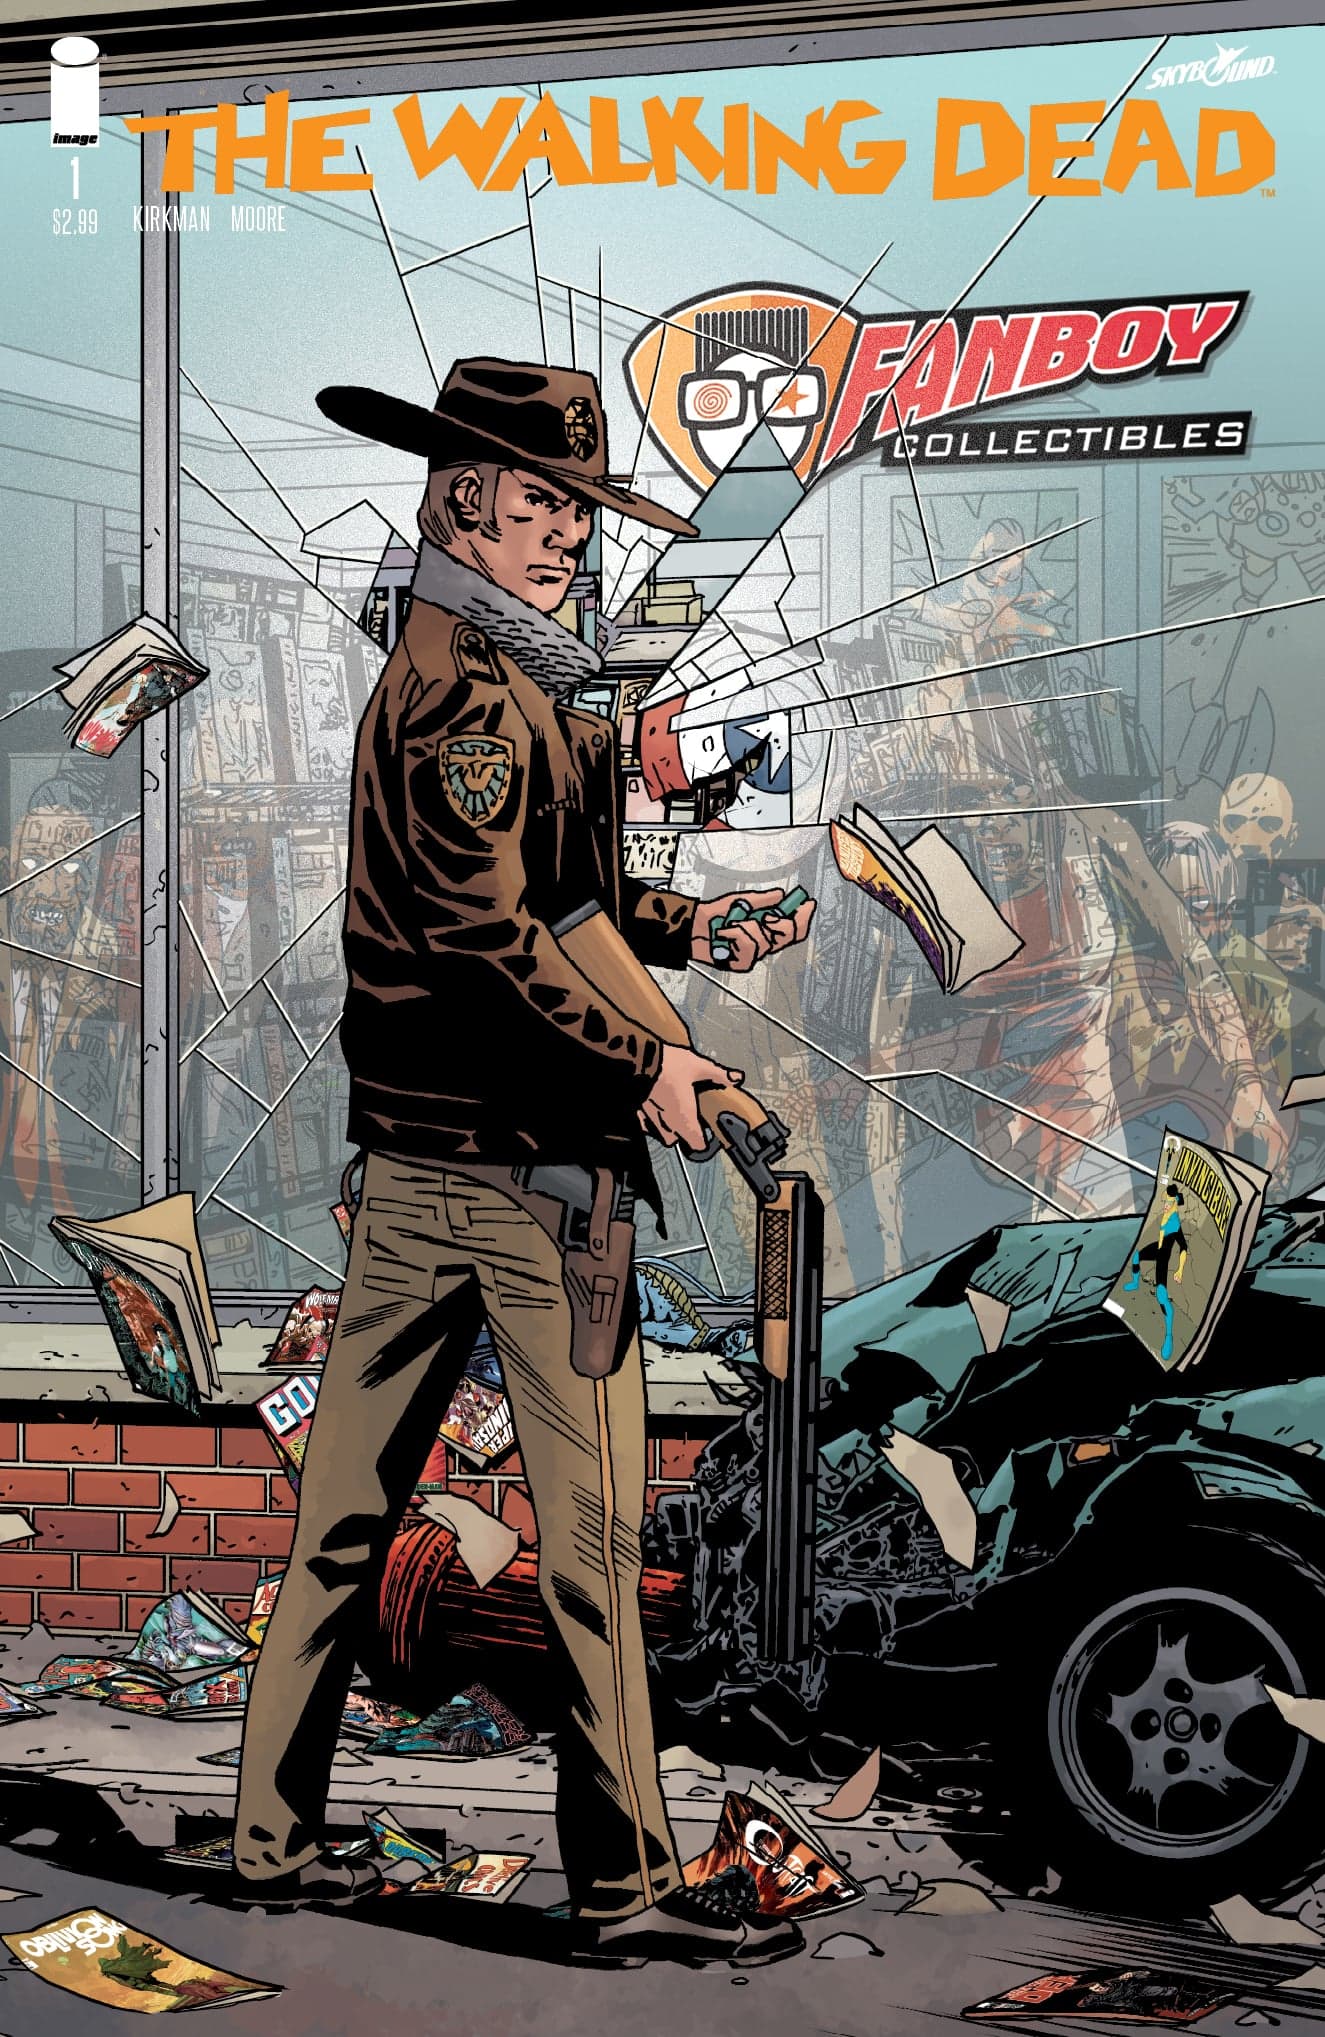 Walking Dead #1 15th Anniversary Retailer Variant Cover